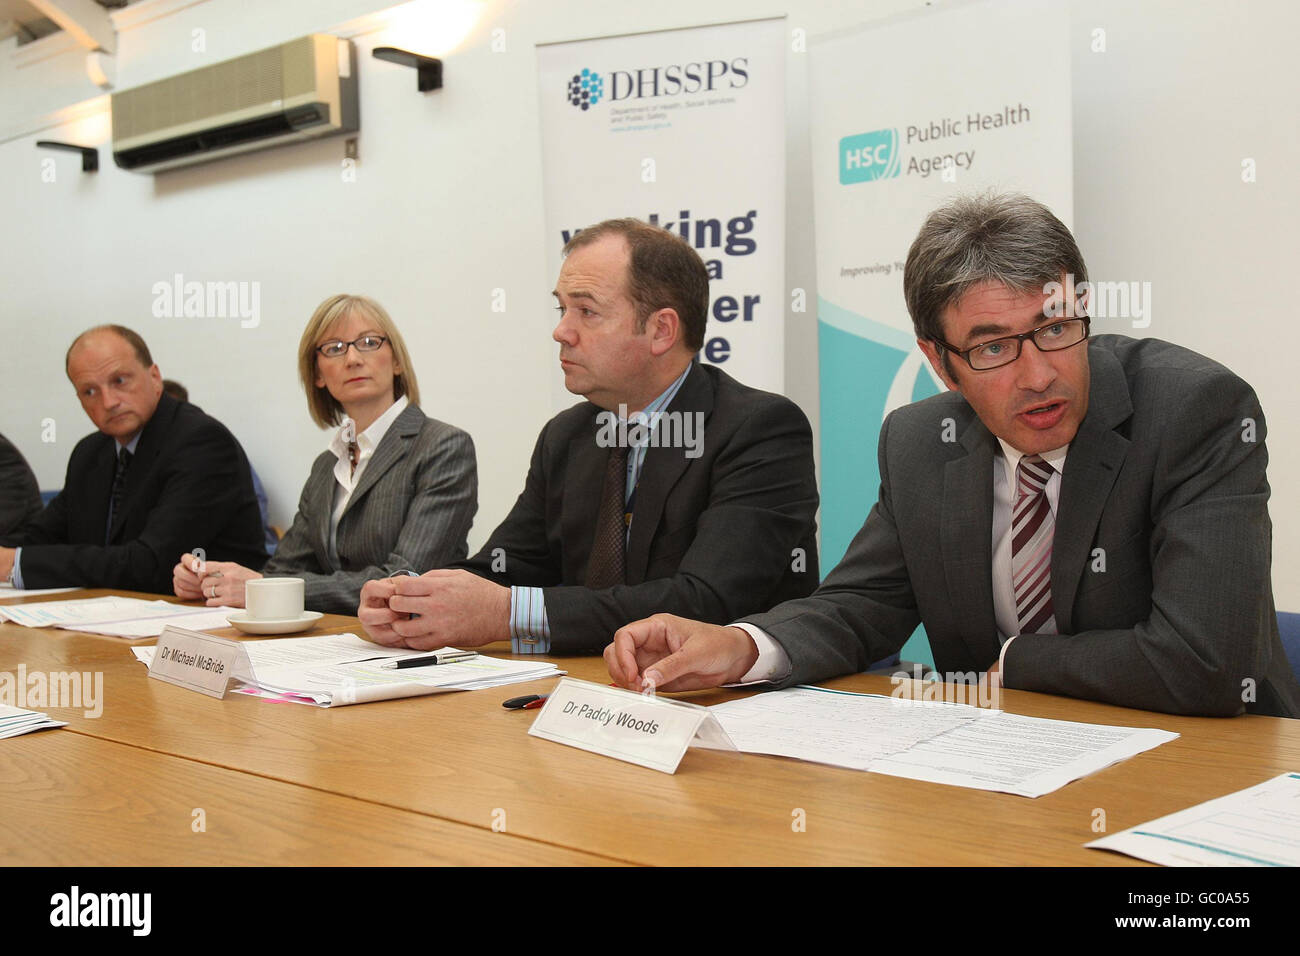 (From left to right) Dr Neil Irvine, Dr Carolyn Harper, Dr Michael McBride and Deputy Chief Medical Officer Paddy Woods speaking about how Northern Ireland will cope with an escalation in swine flu during a press briefing, in Ormeau Baths Public Health Agency building in Belfast. Stock Photo